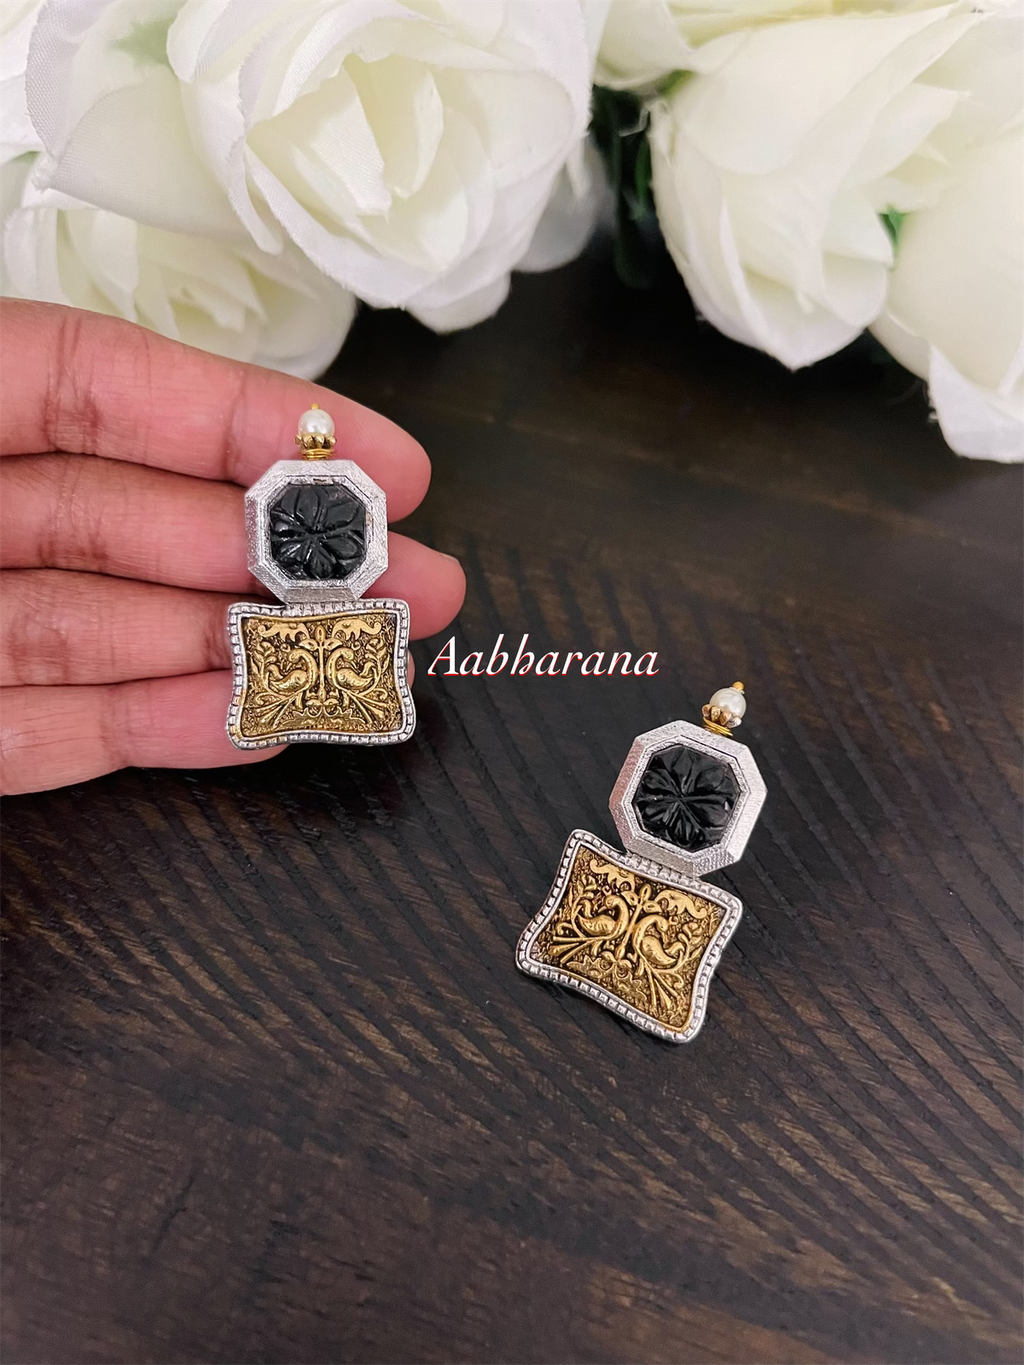 Carved stone fusion peacock stud earrings